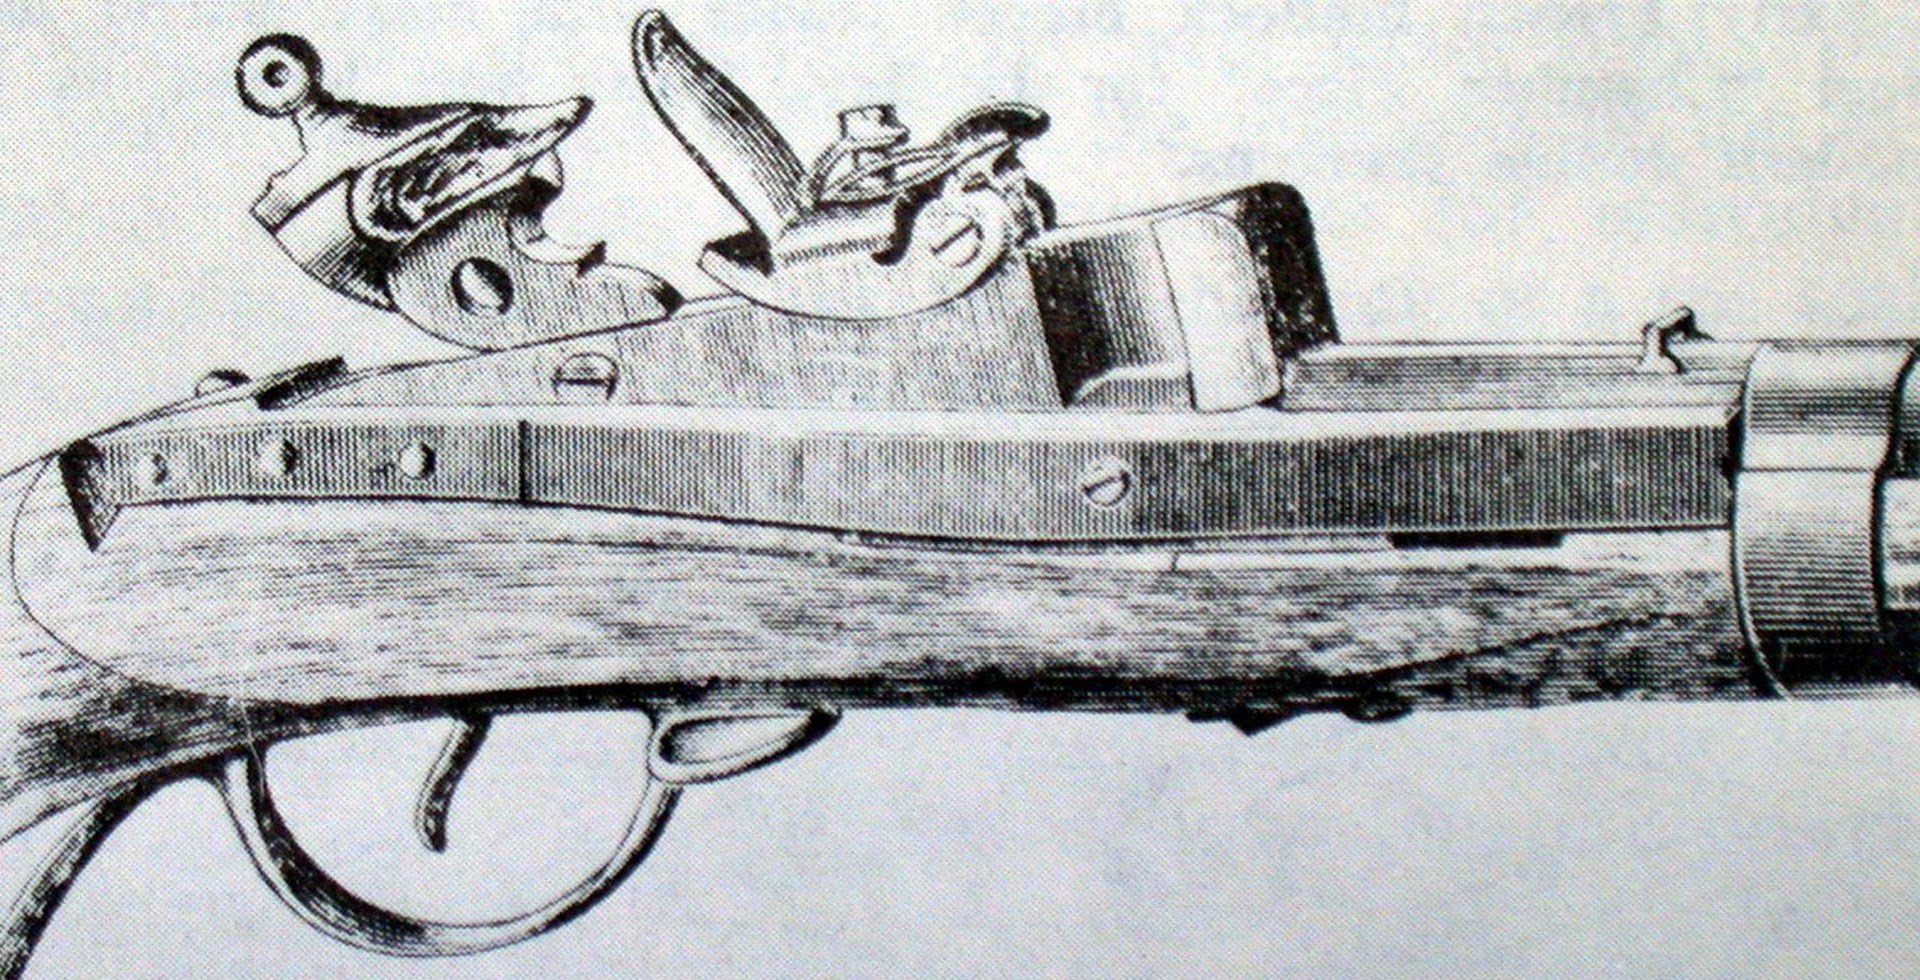 Shown above is a photo of a contemporary drawing of the 1819 Hall Rifle with its breech open. Image courtesy of Wikimedia Commons.